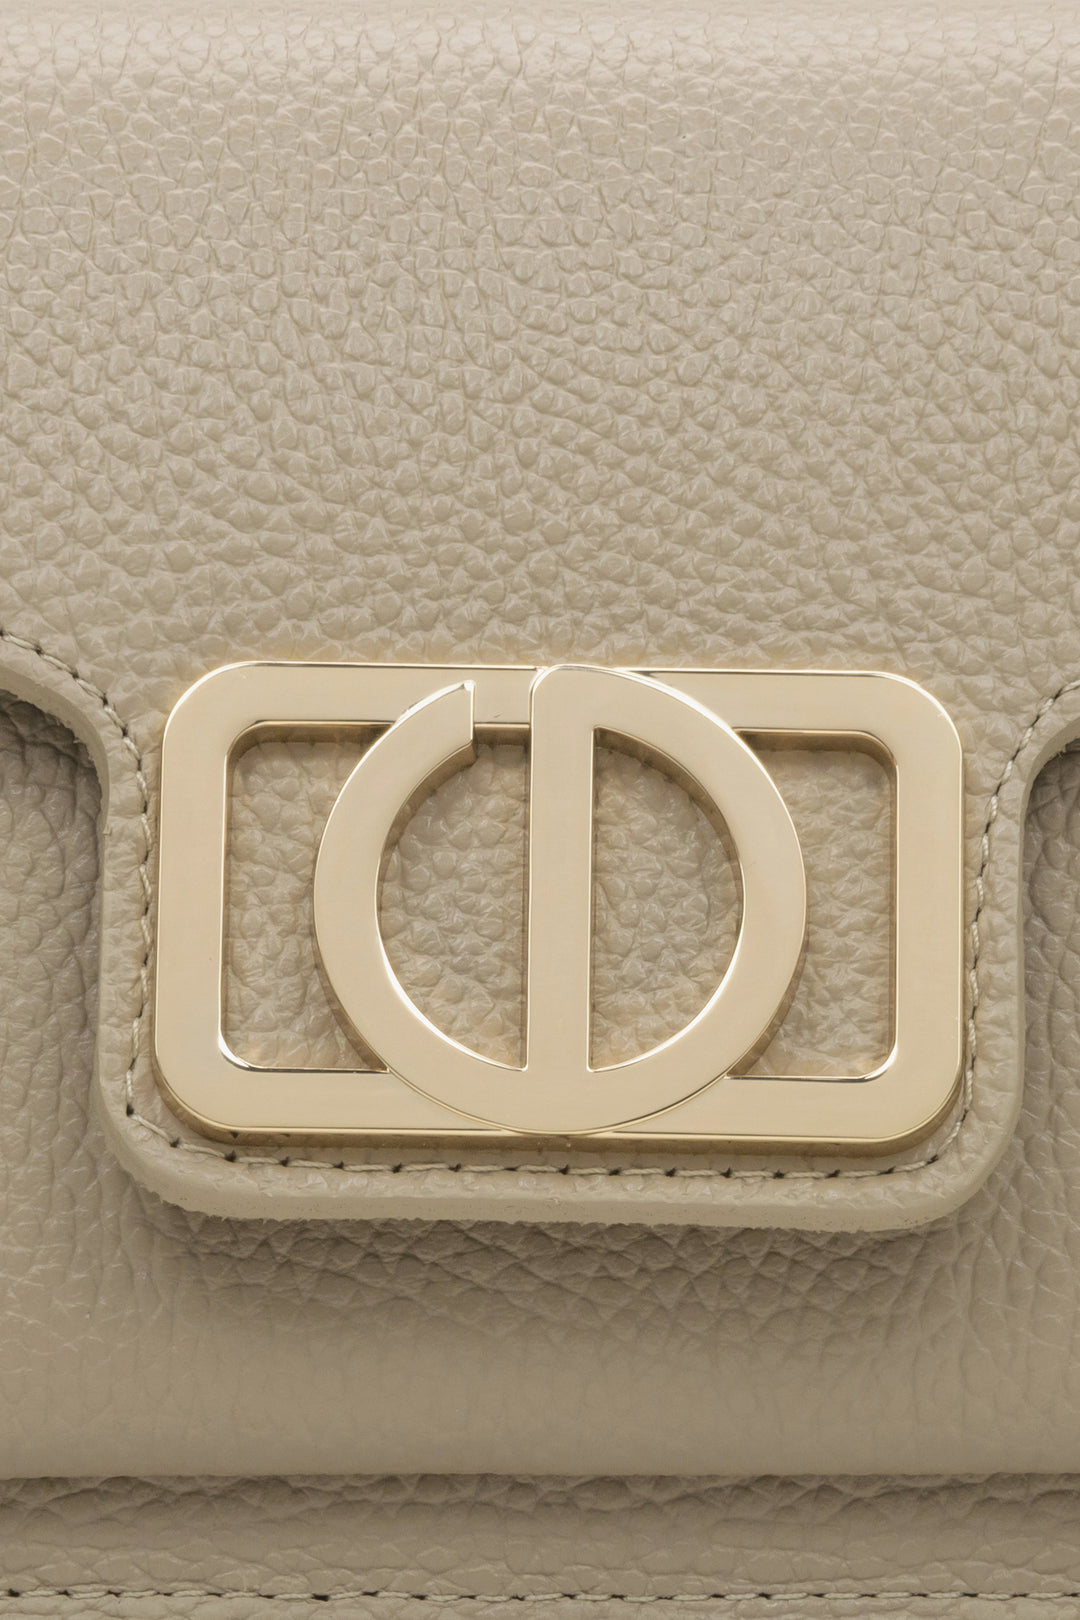 Women's beige shoulder bag made of Italian genuine leather by Estro - close-up on the details.